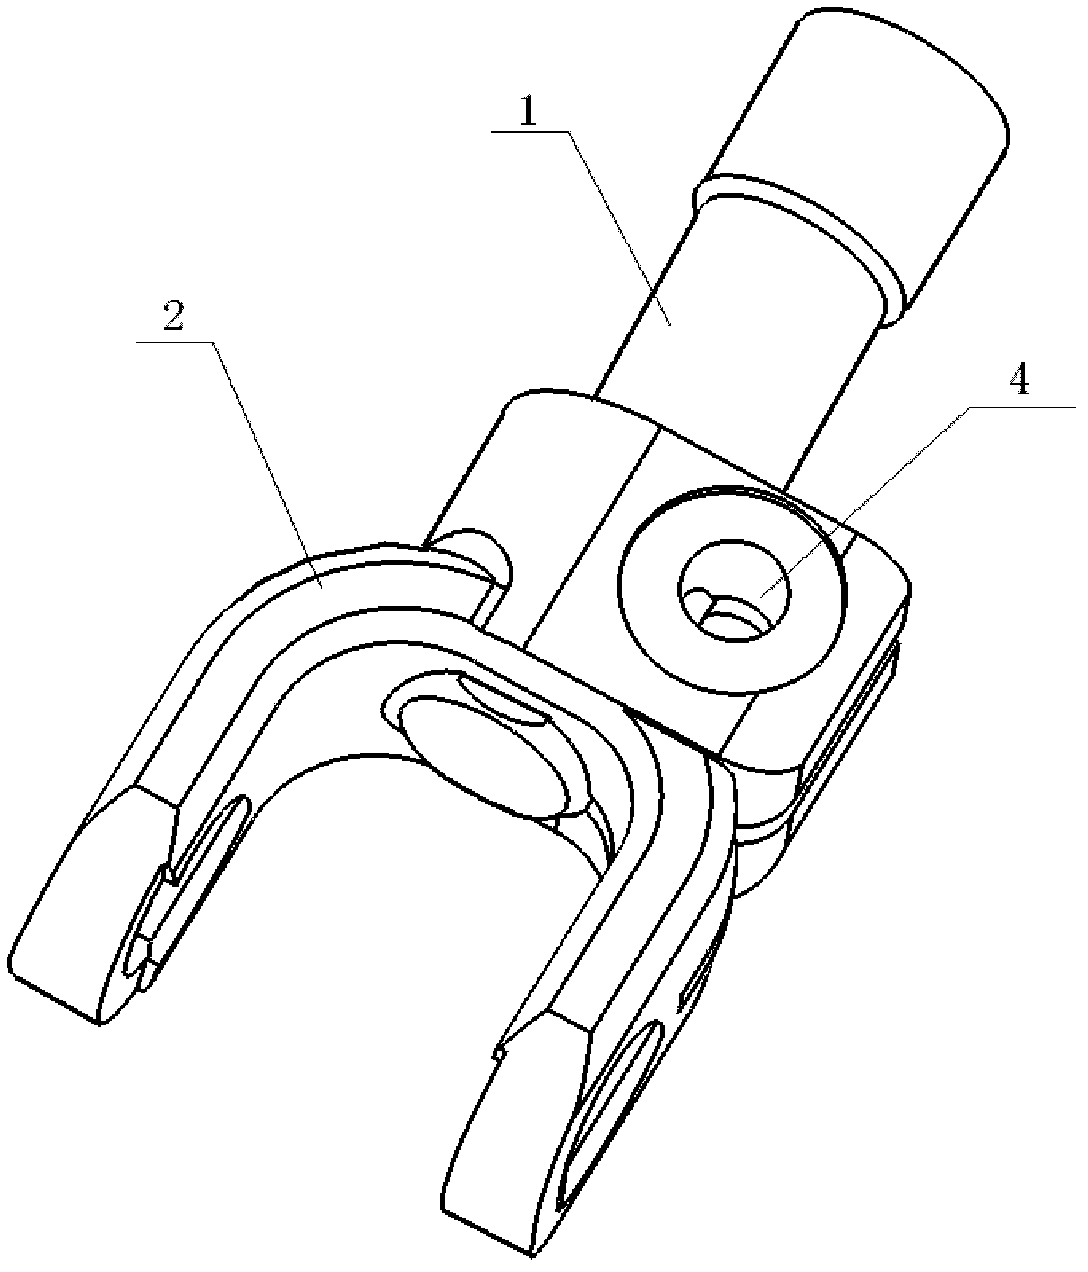 Connection structure of automobile steering system